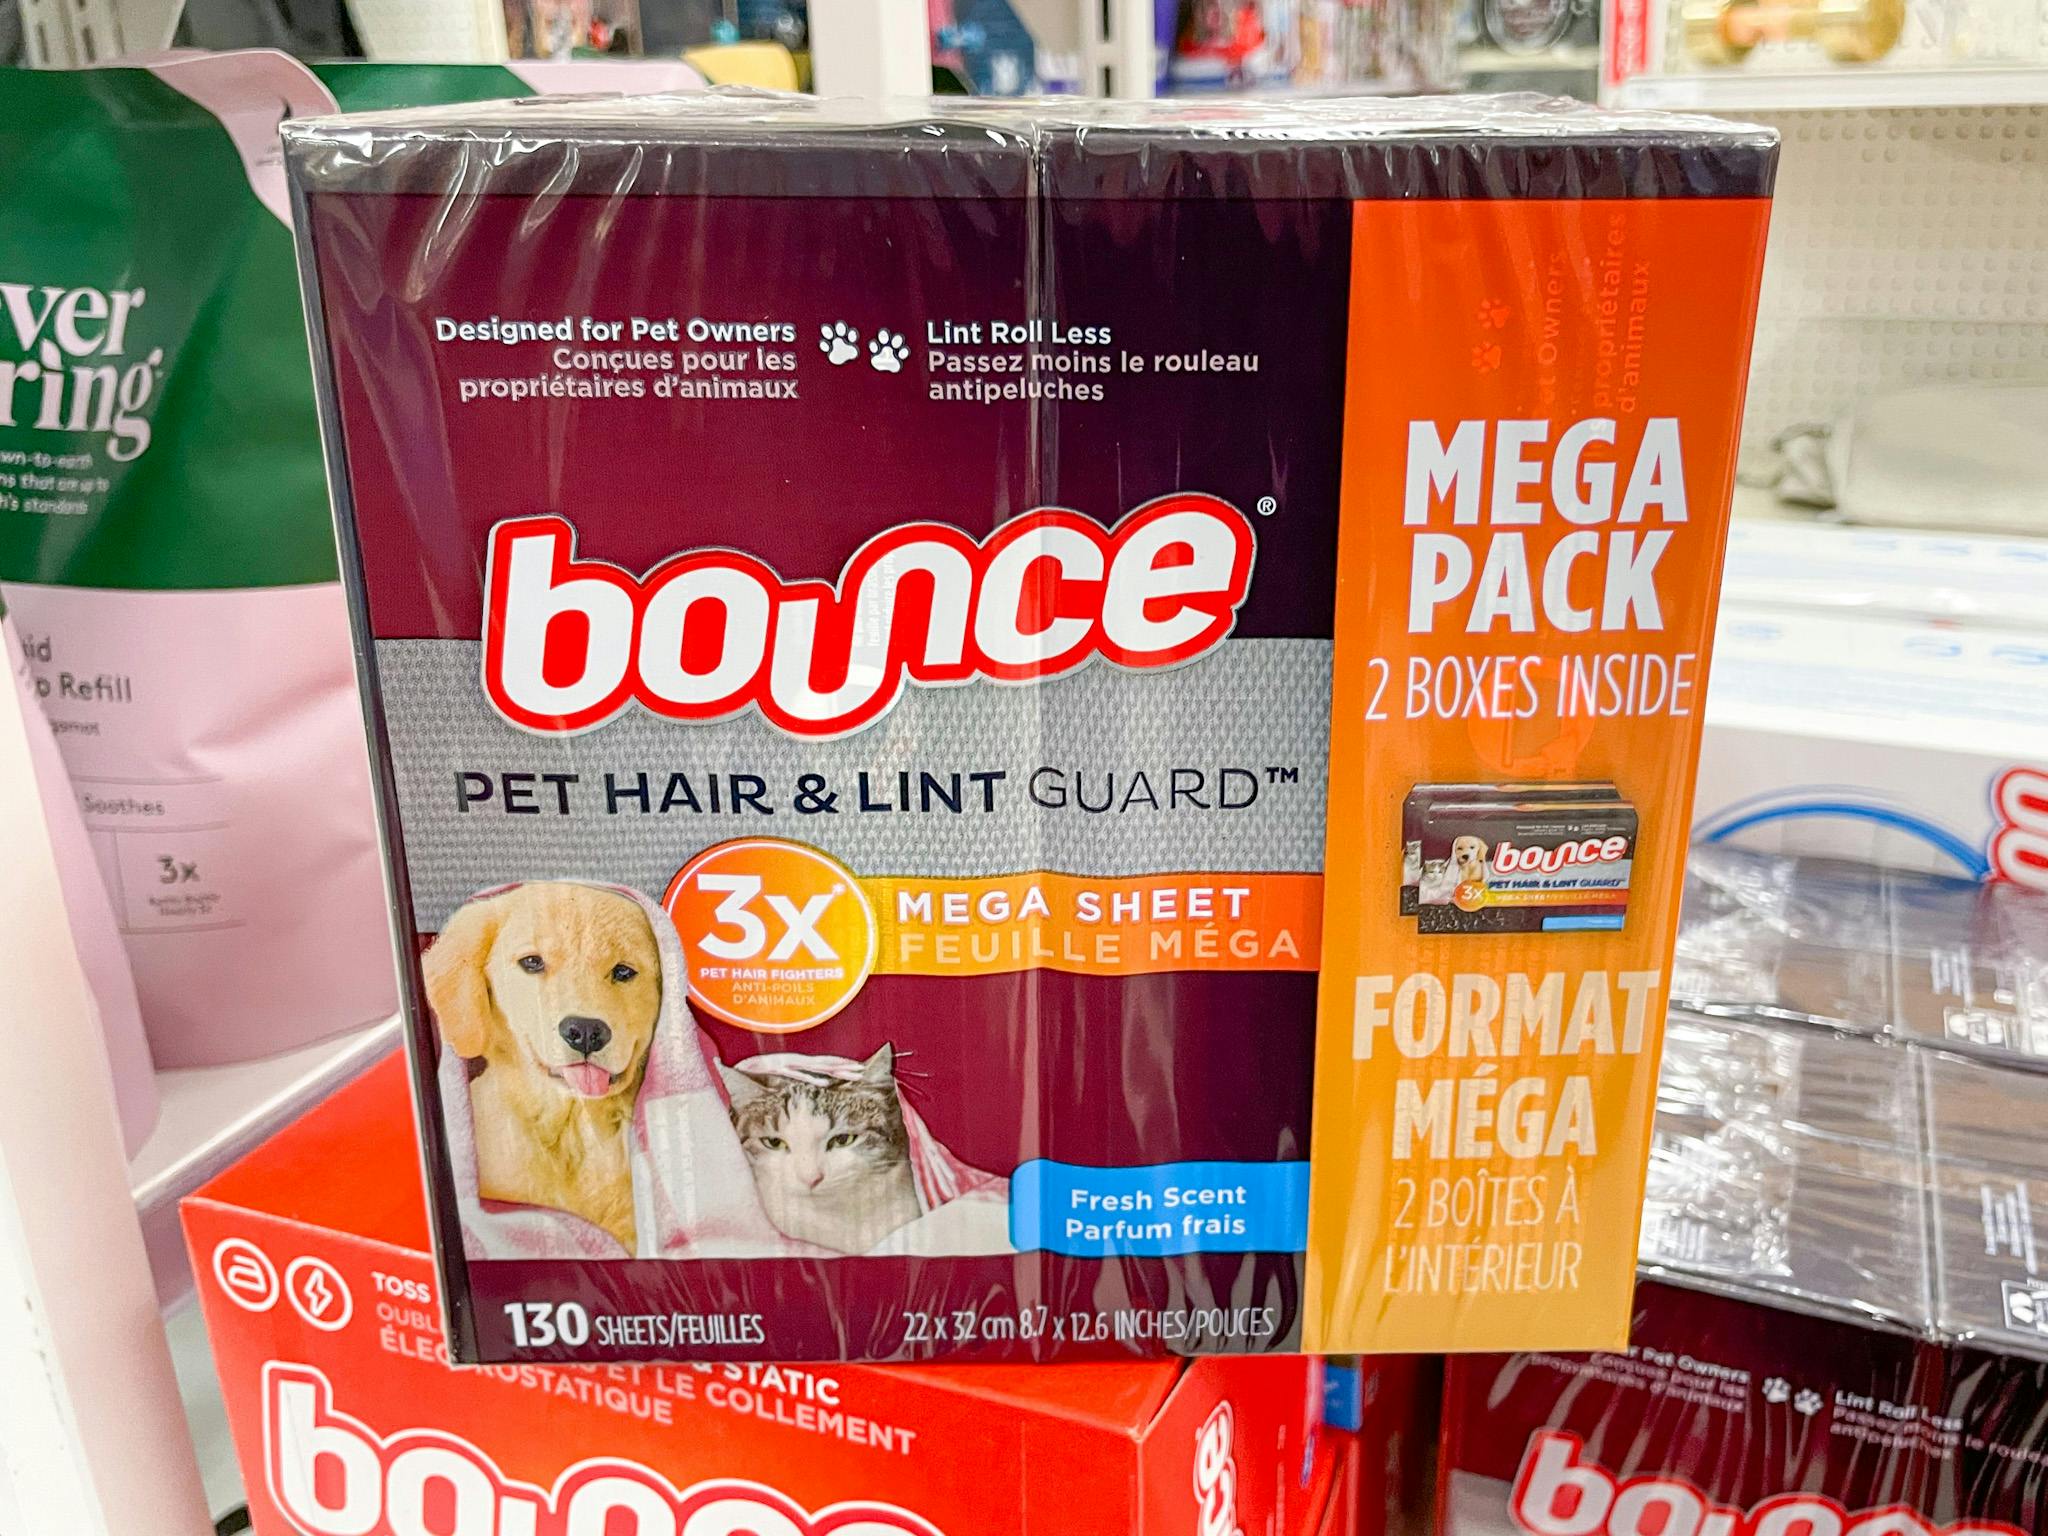 130 count box of bounce pet & link guard dryer sheets